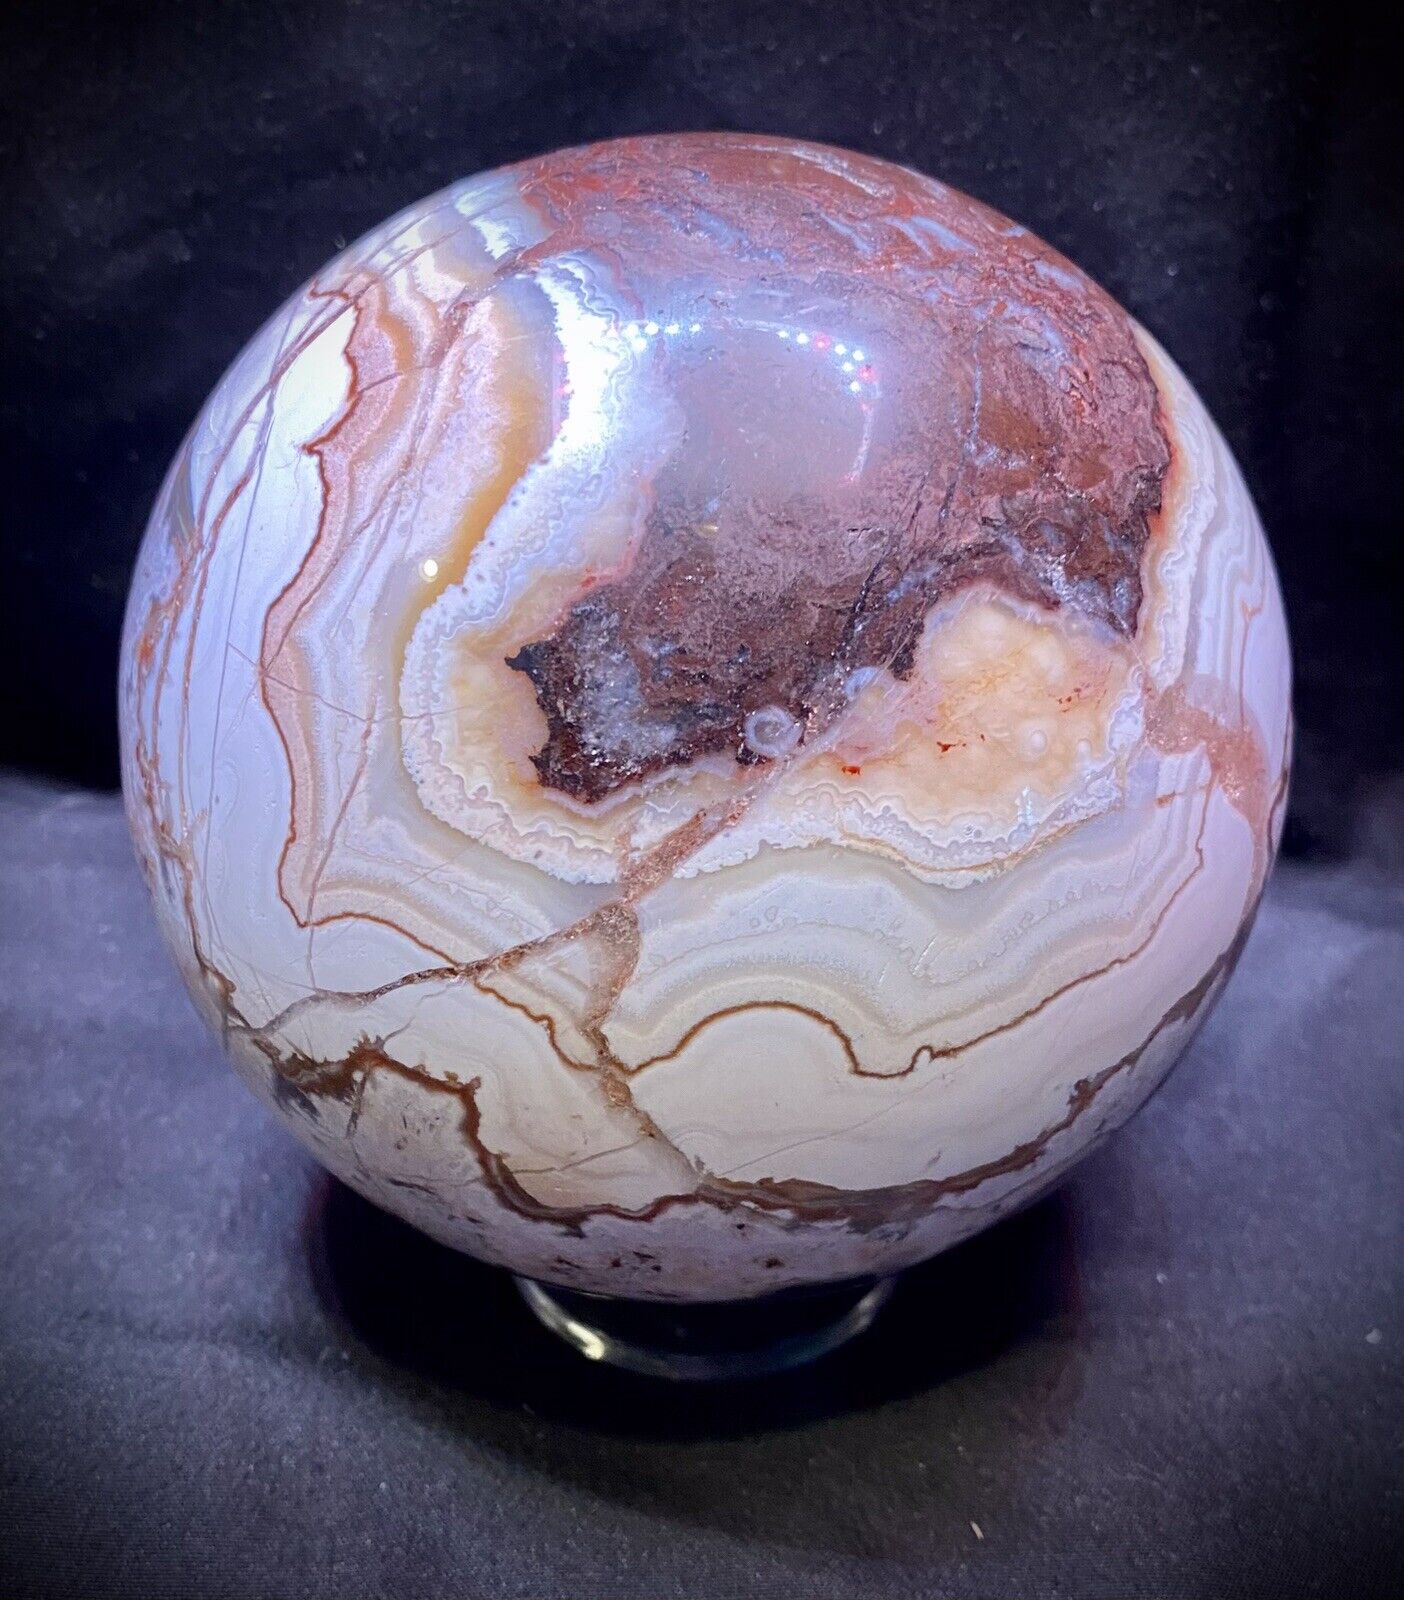 Jumbo Mexican Crazy Lace Agate Sphere 1.5kg